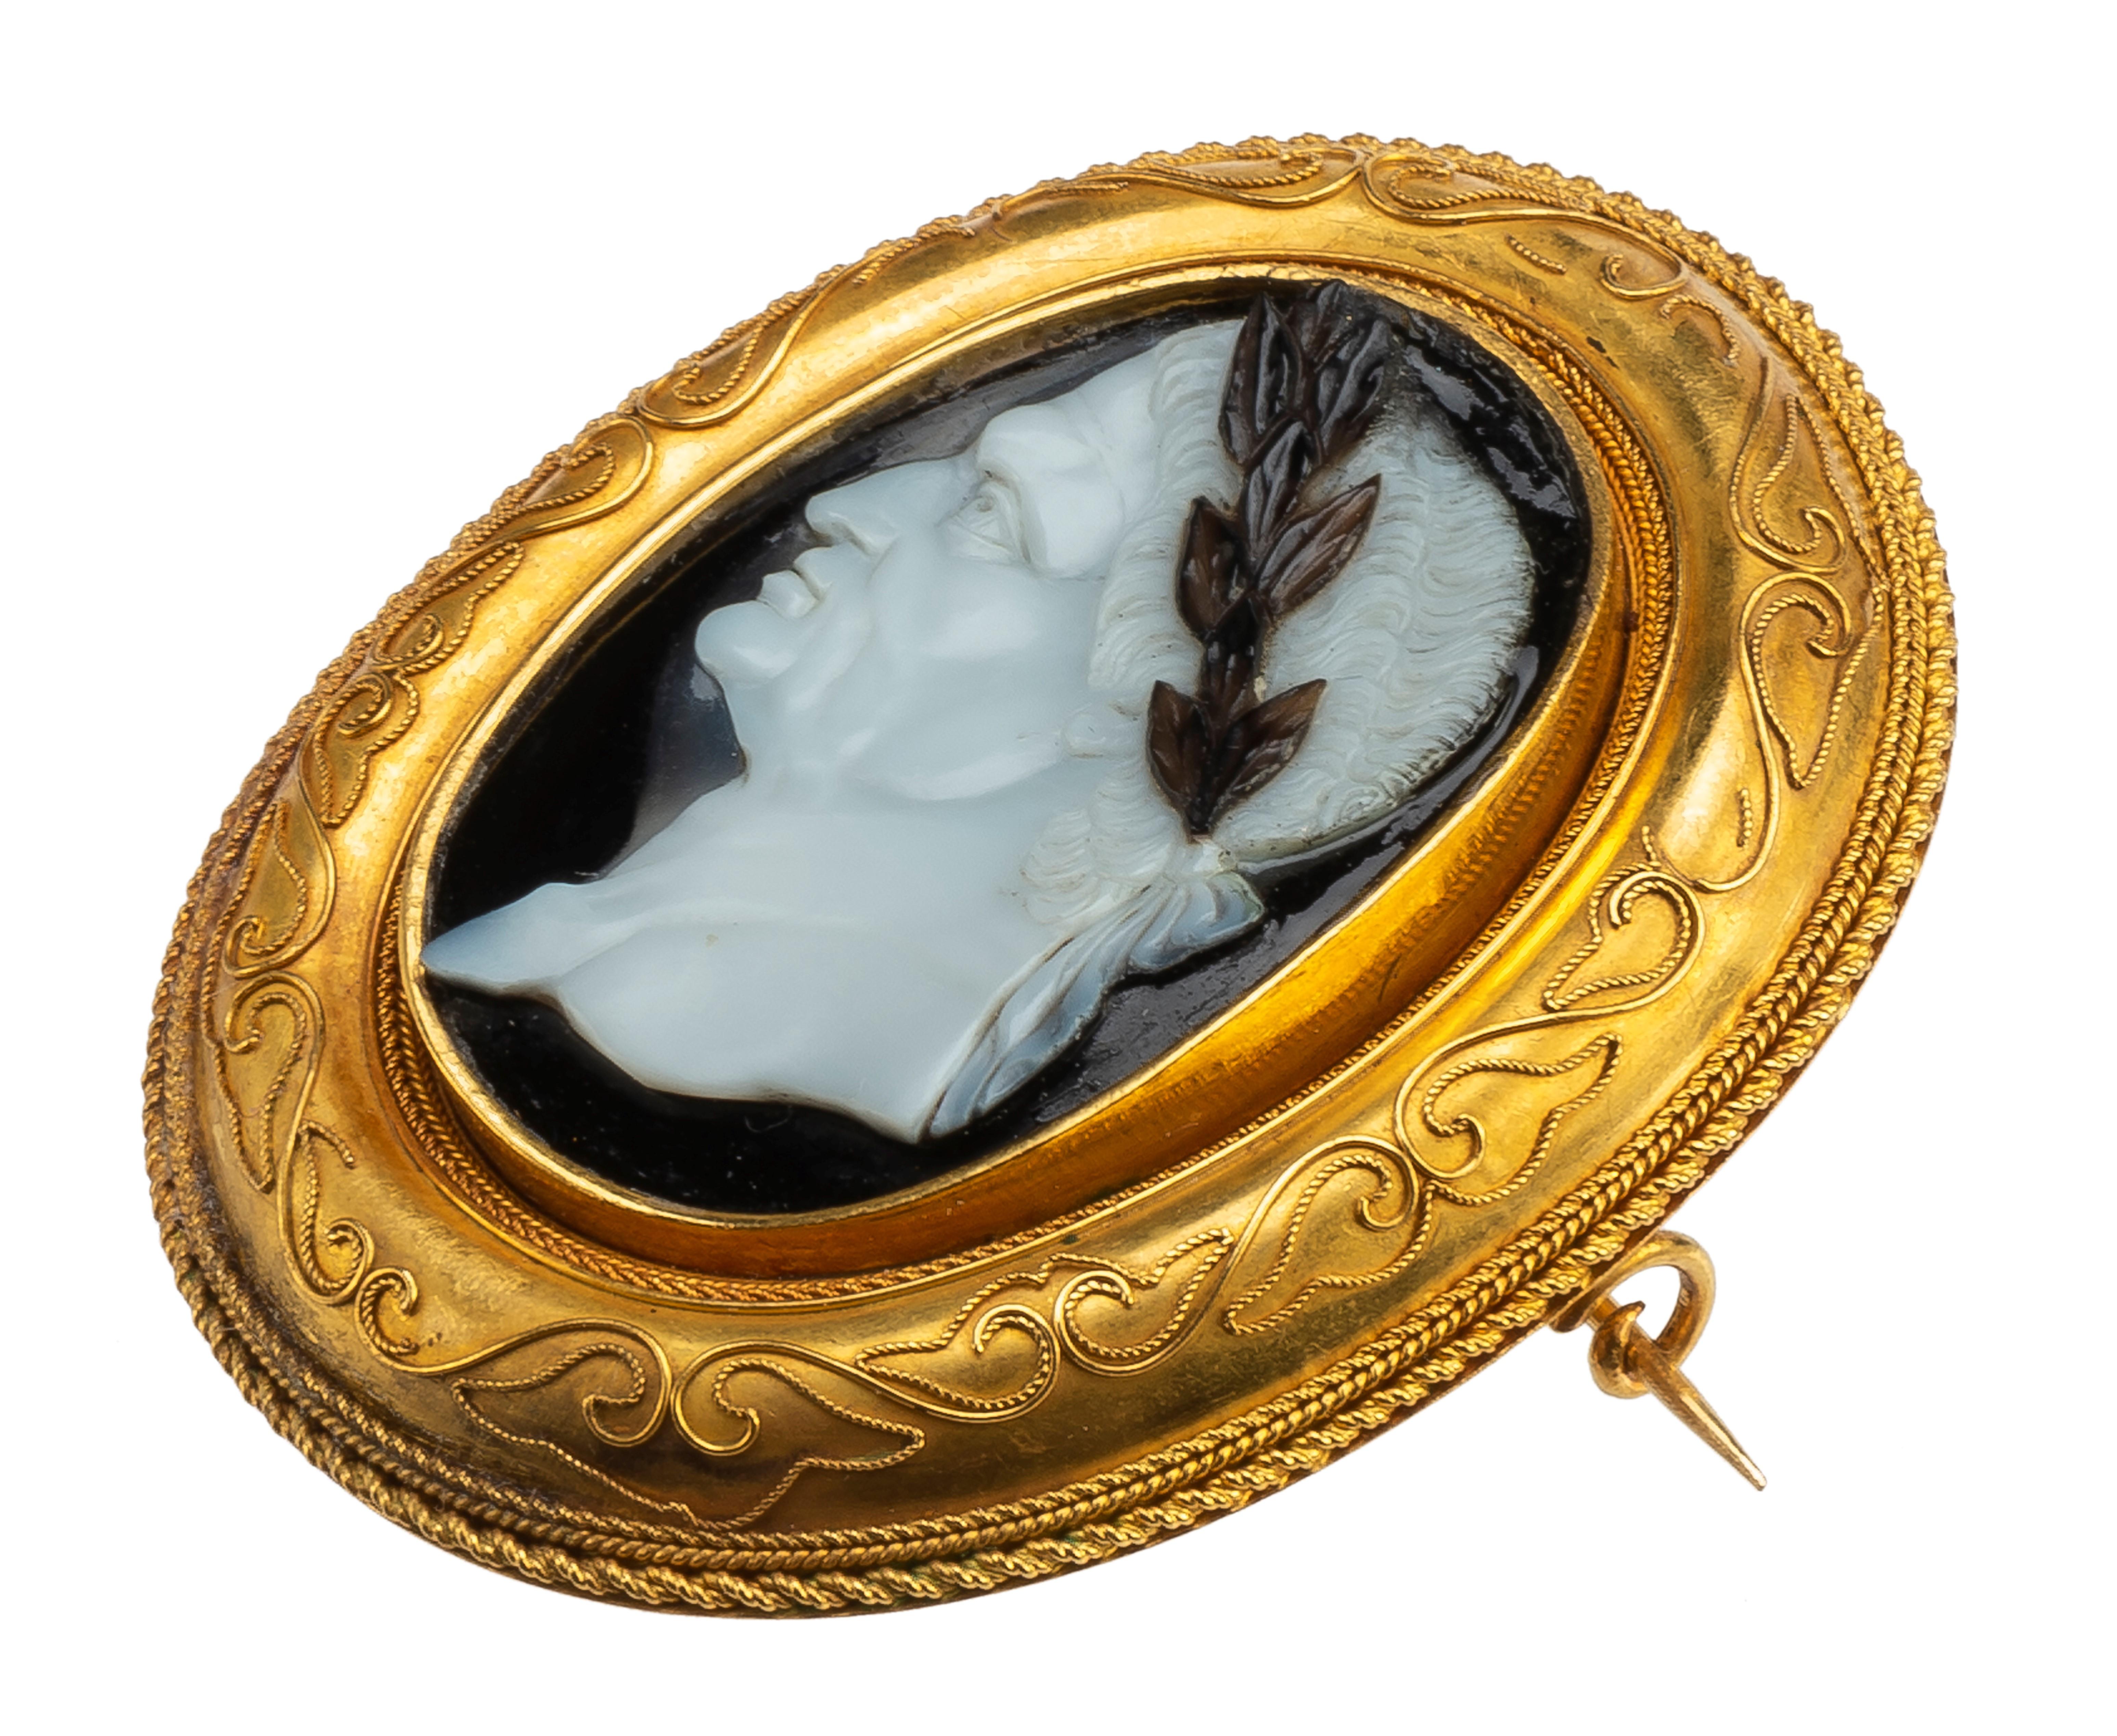 Renaissance Portrait Cameo of Emperor Vespasian in a Gold Brooch In Good Condition For Sale In Chicago, IL